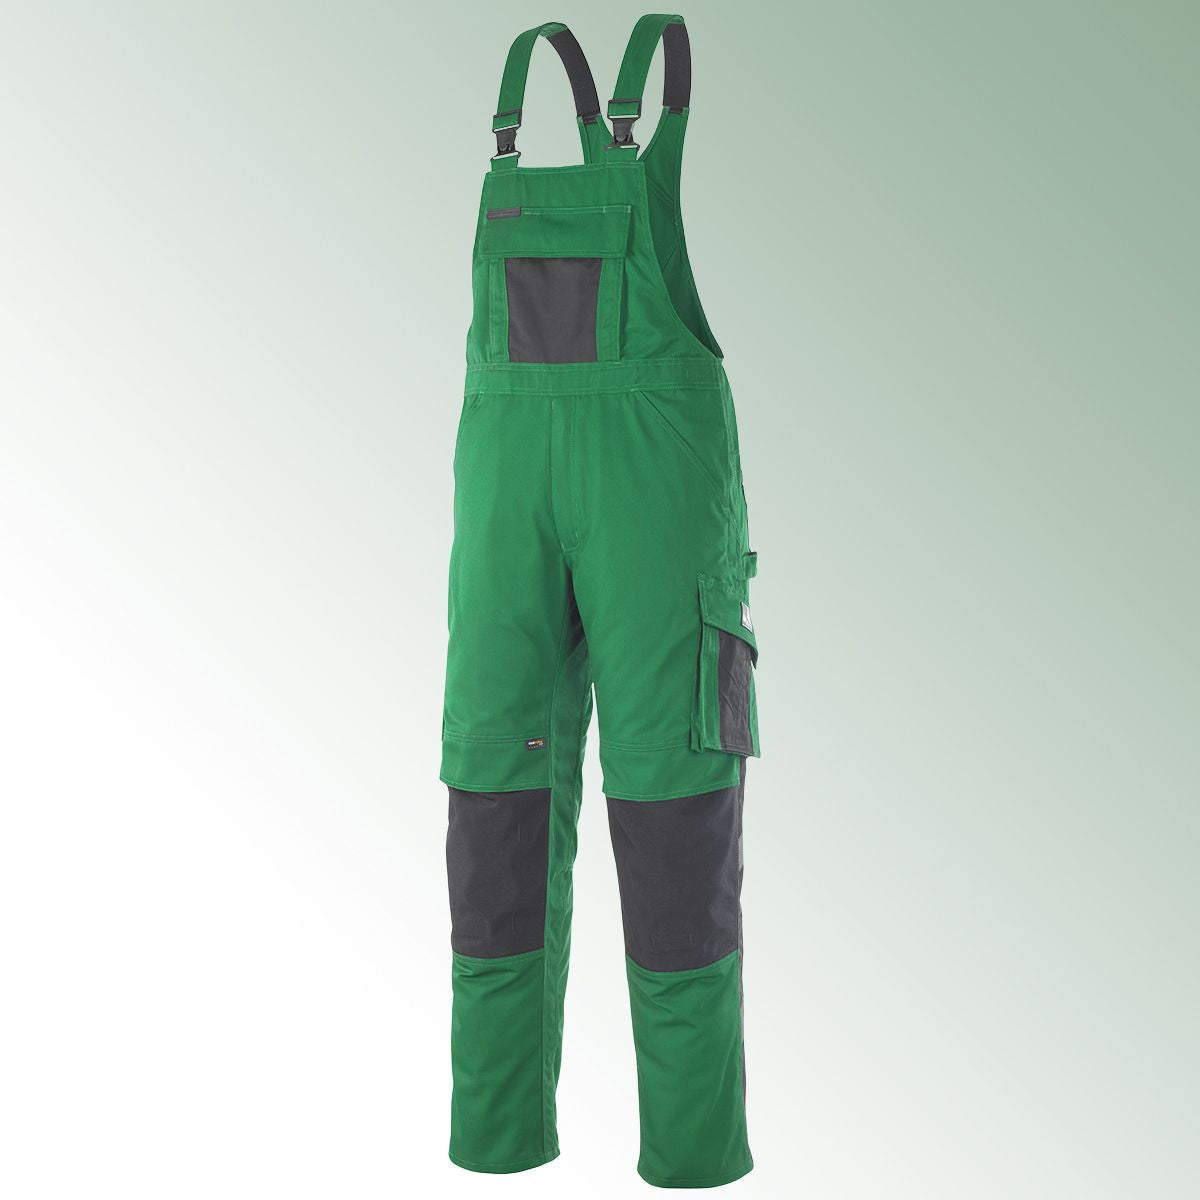 Dungarees Augsburg Size 56 Green / Black